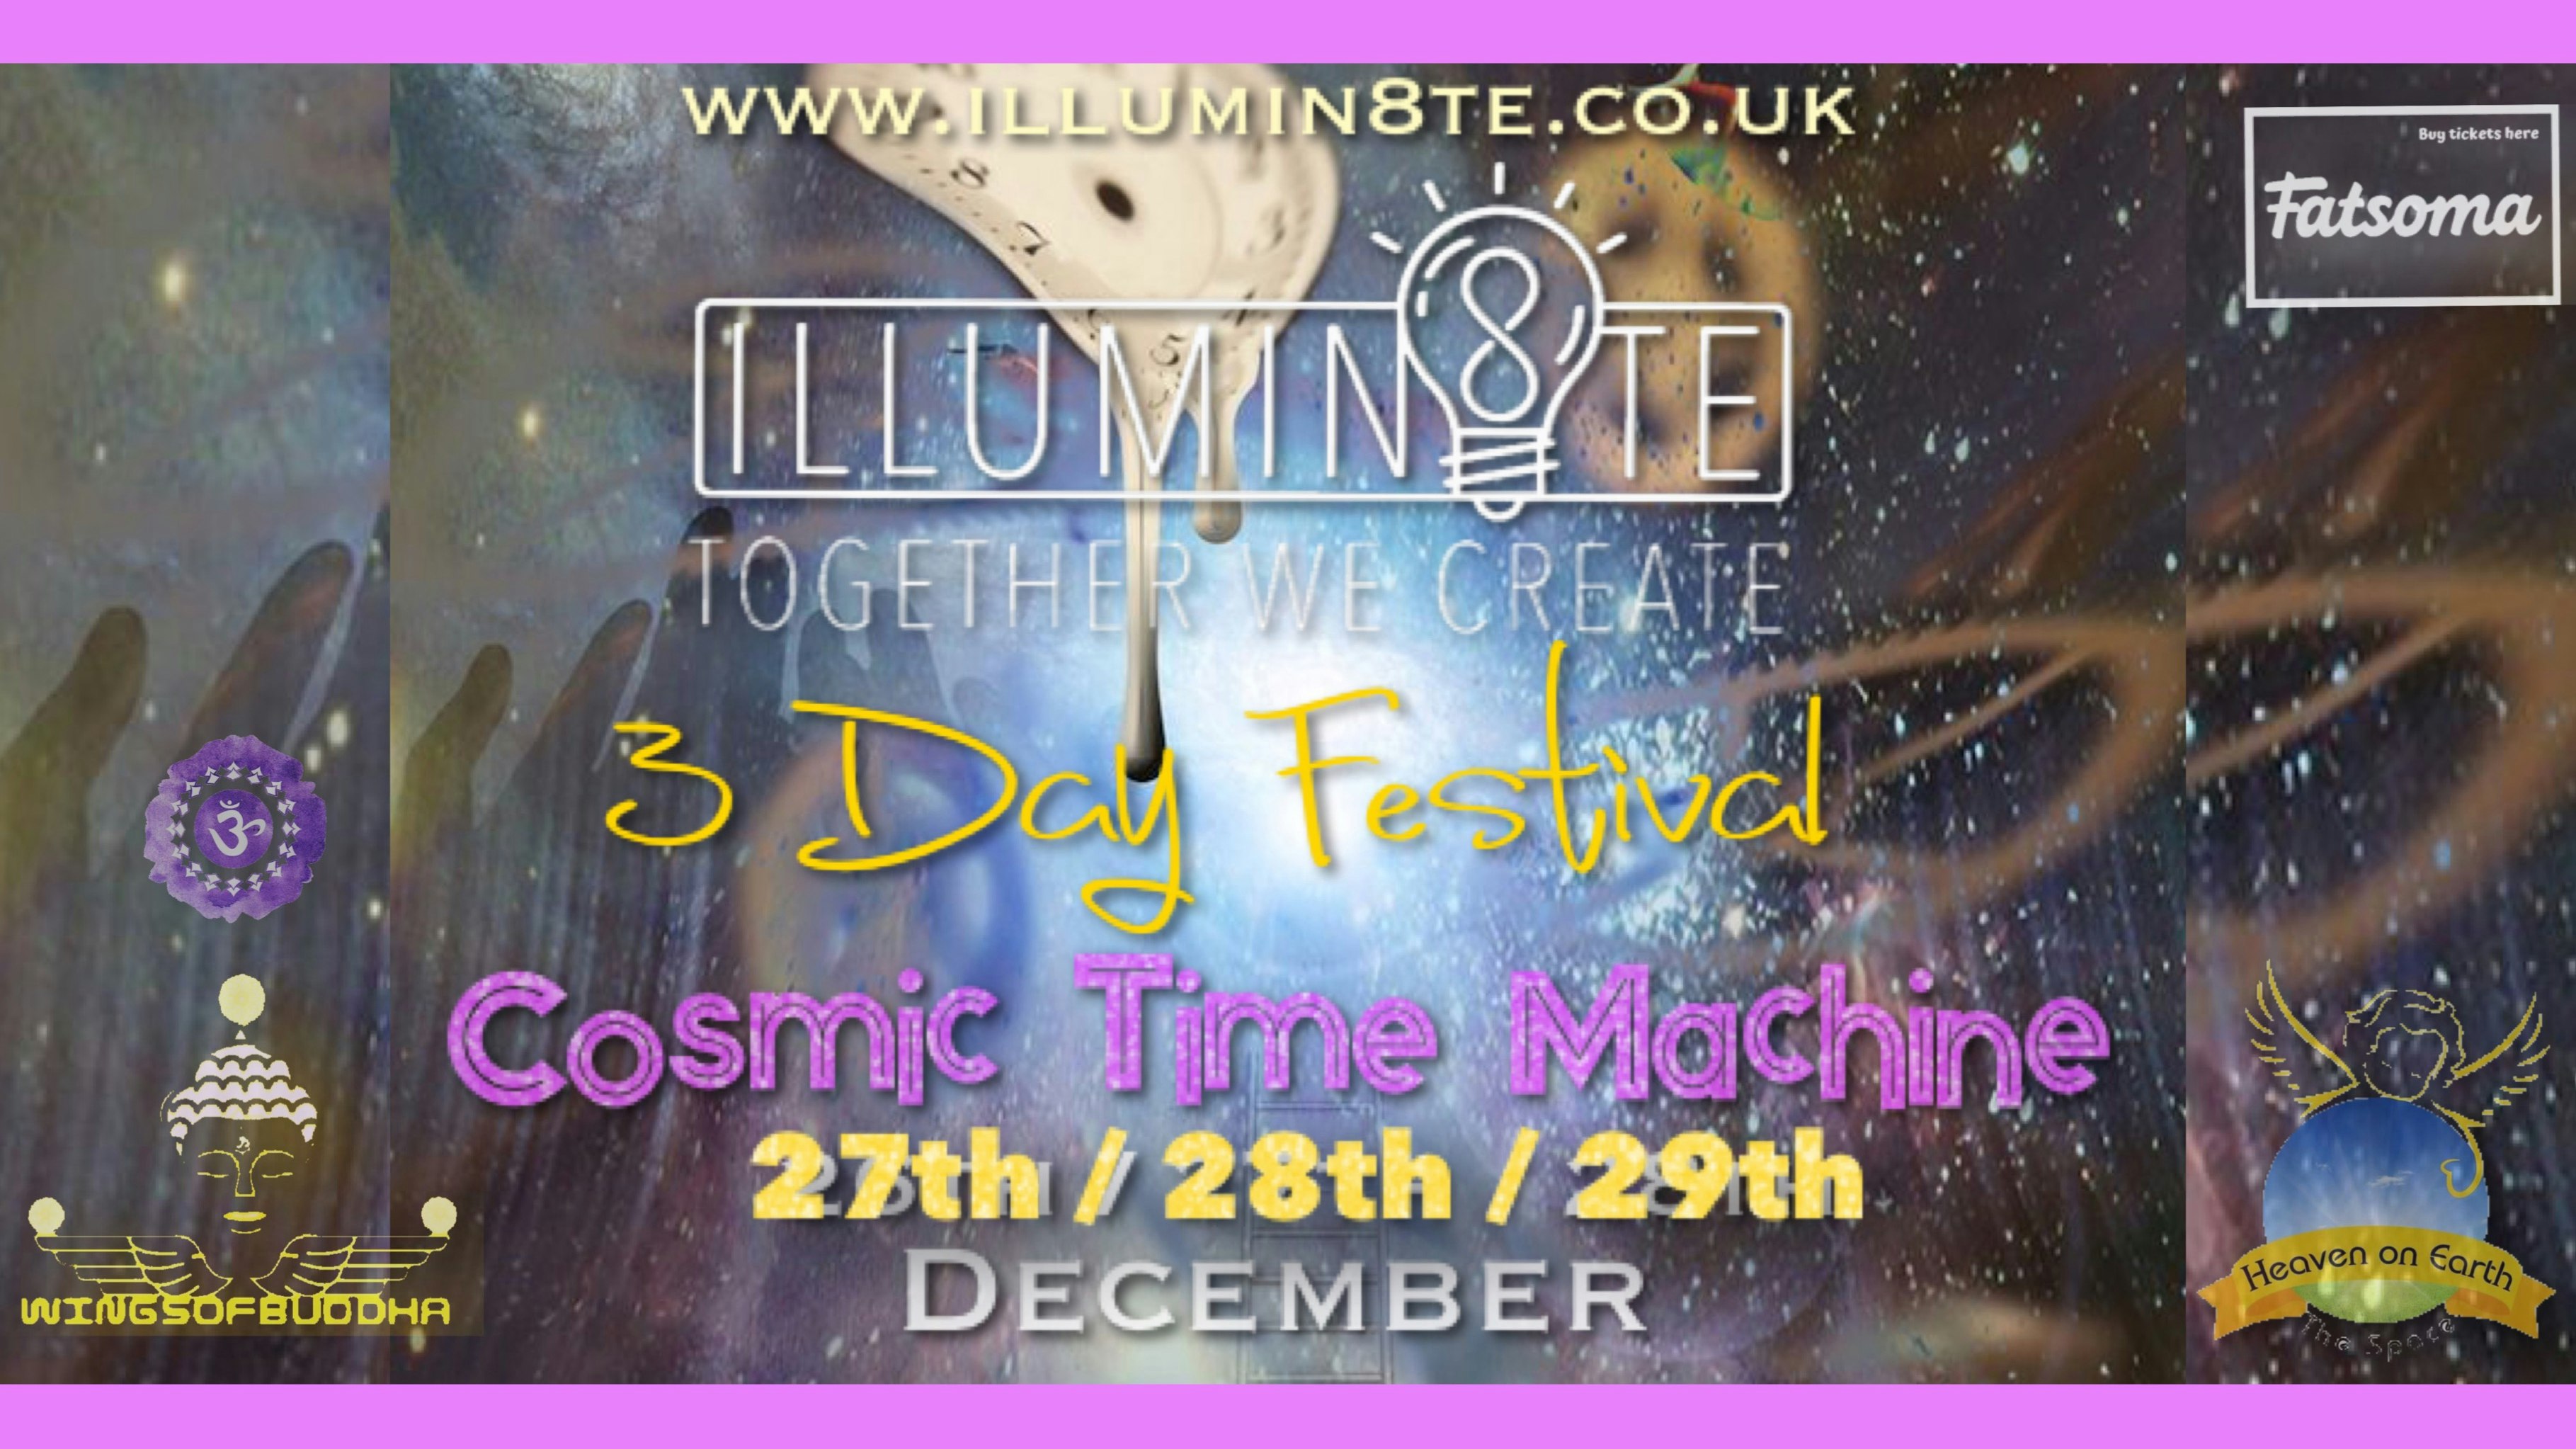 Illumin8te 3 Day Festival Cosmic Time Machine  (Mon 27th / Tues 28th / Wed 29th  December) @ Heave On Earth – Manchester